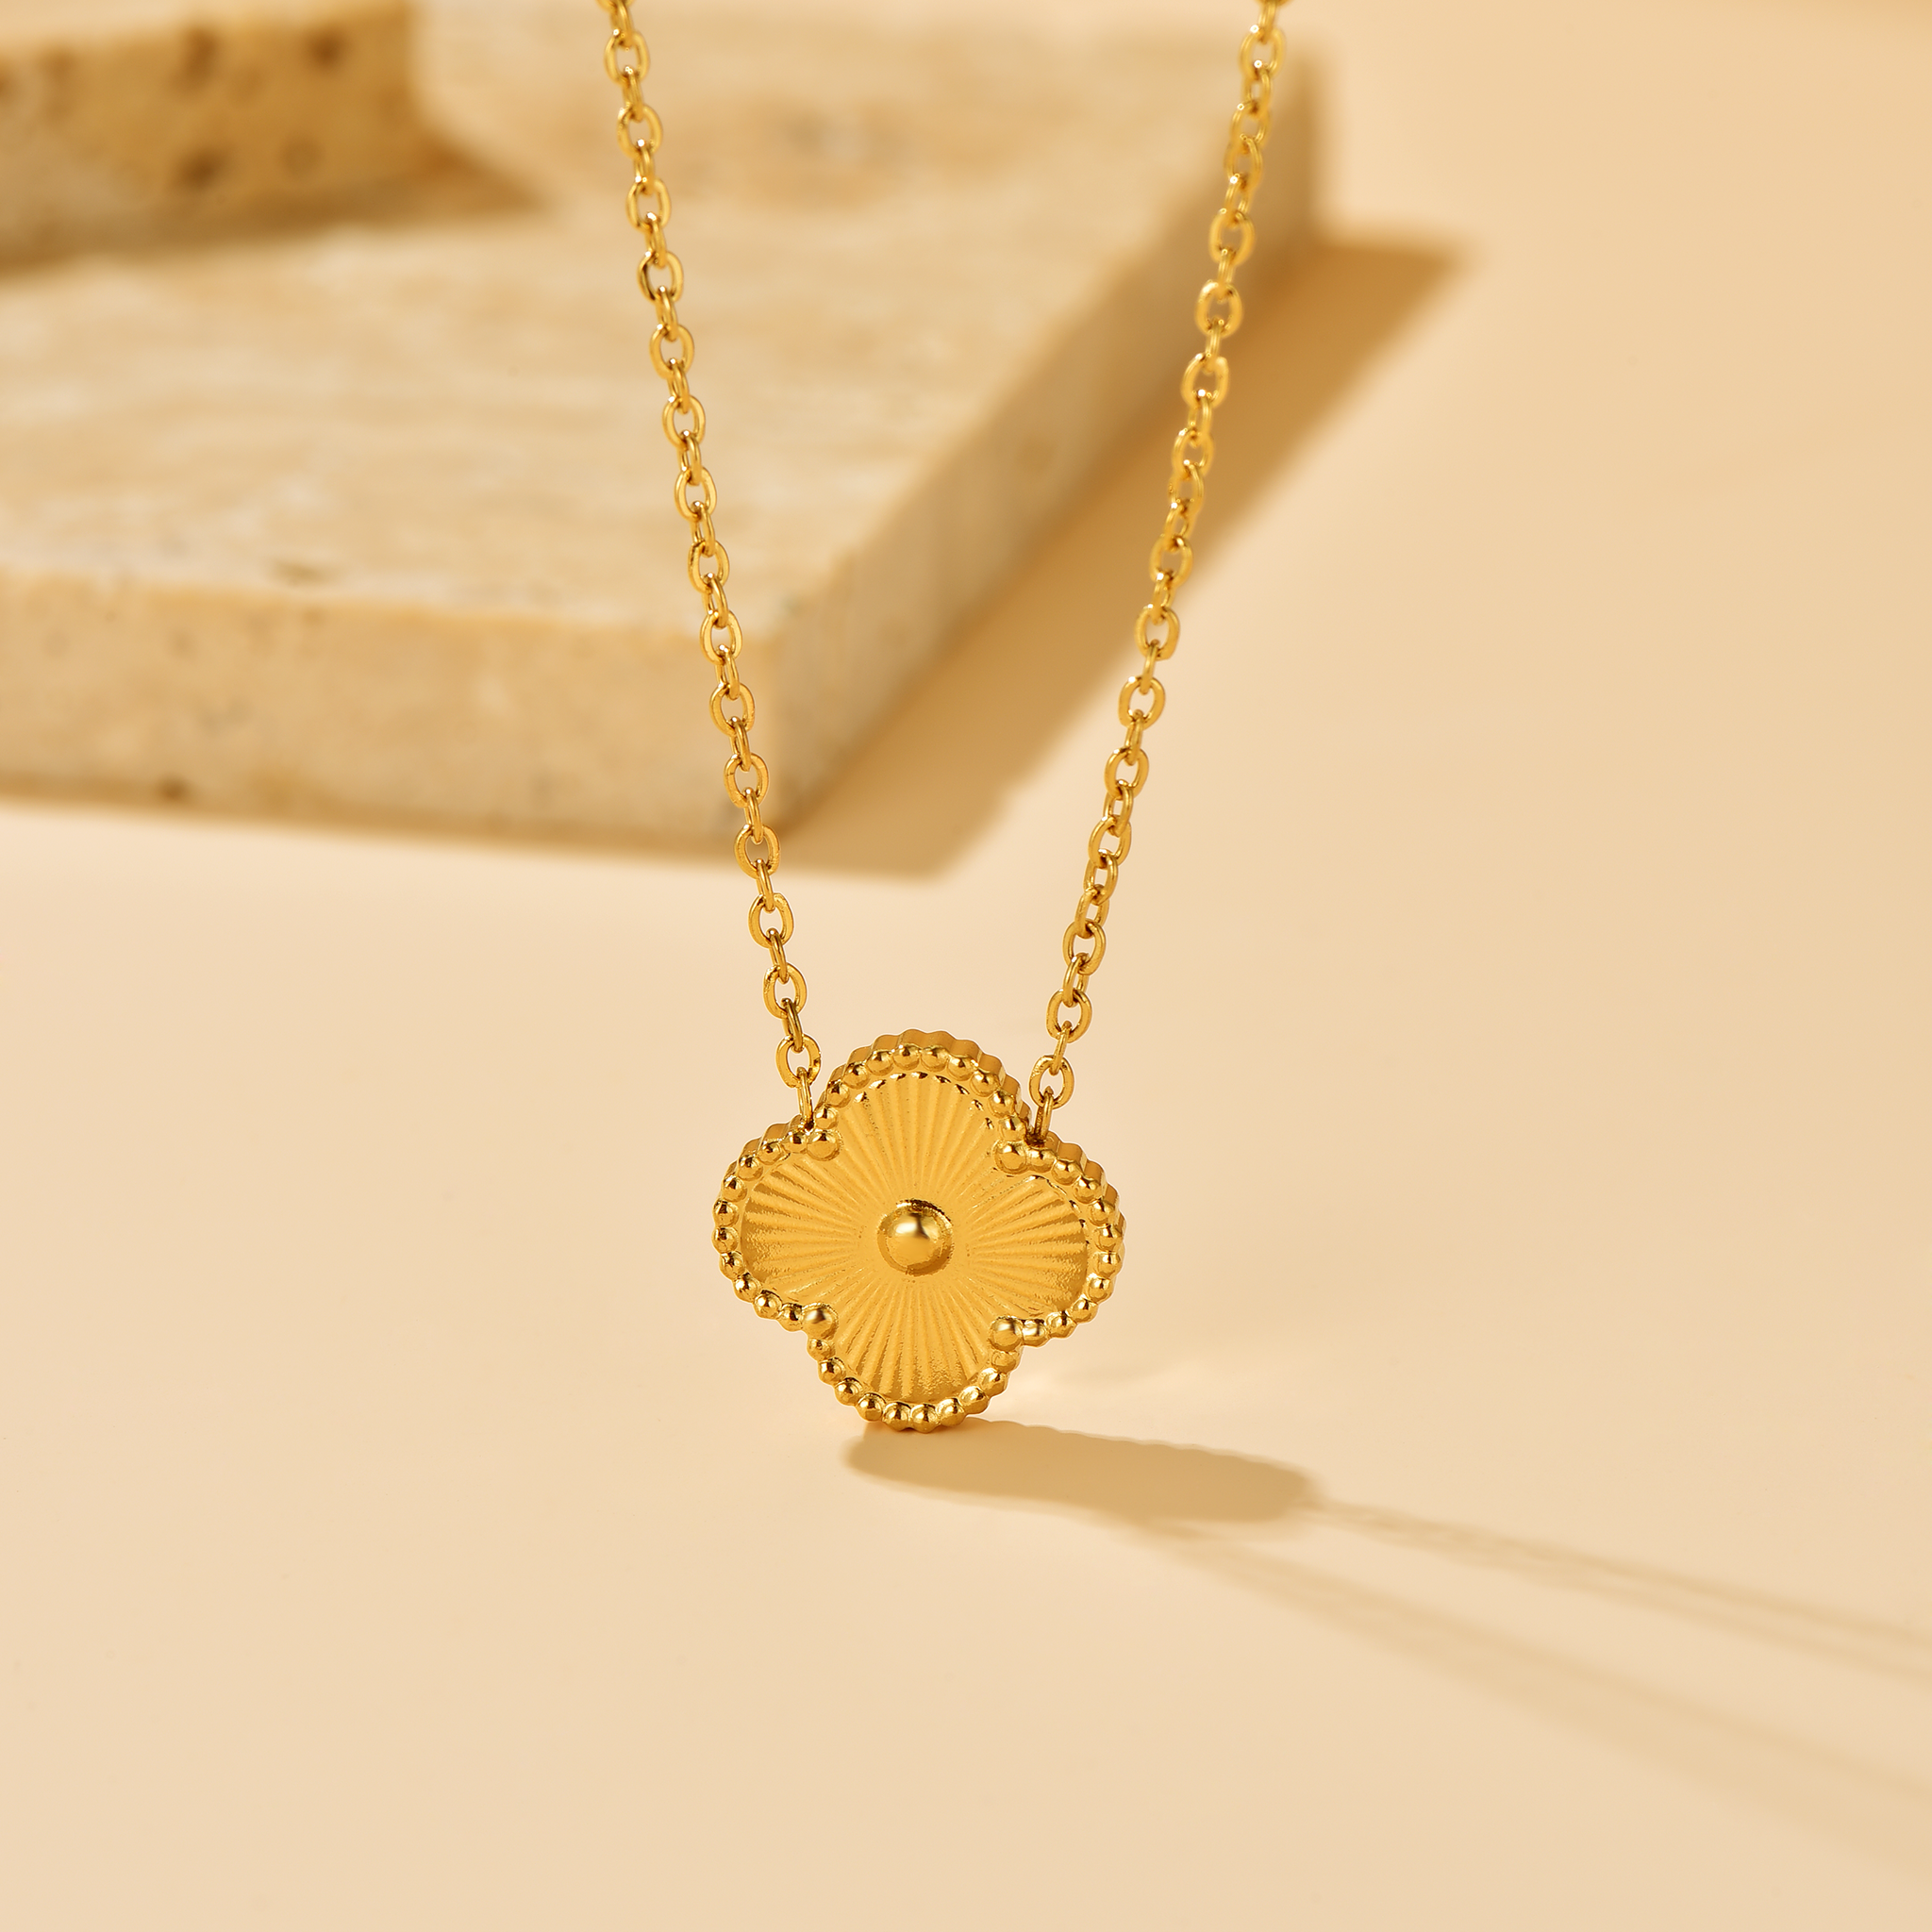 Personalized Pendant Necklace in Gold-Plated Sterling Silver – Jurelli